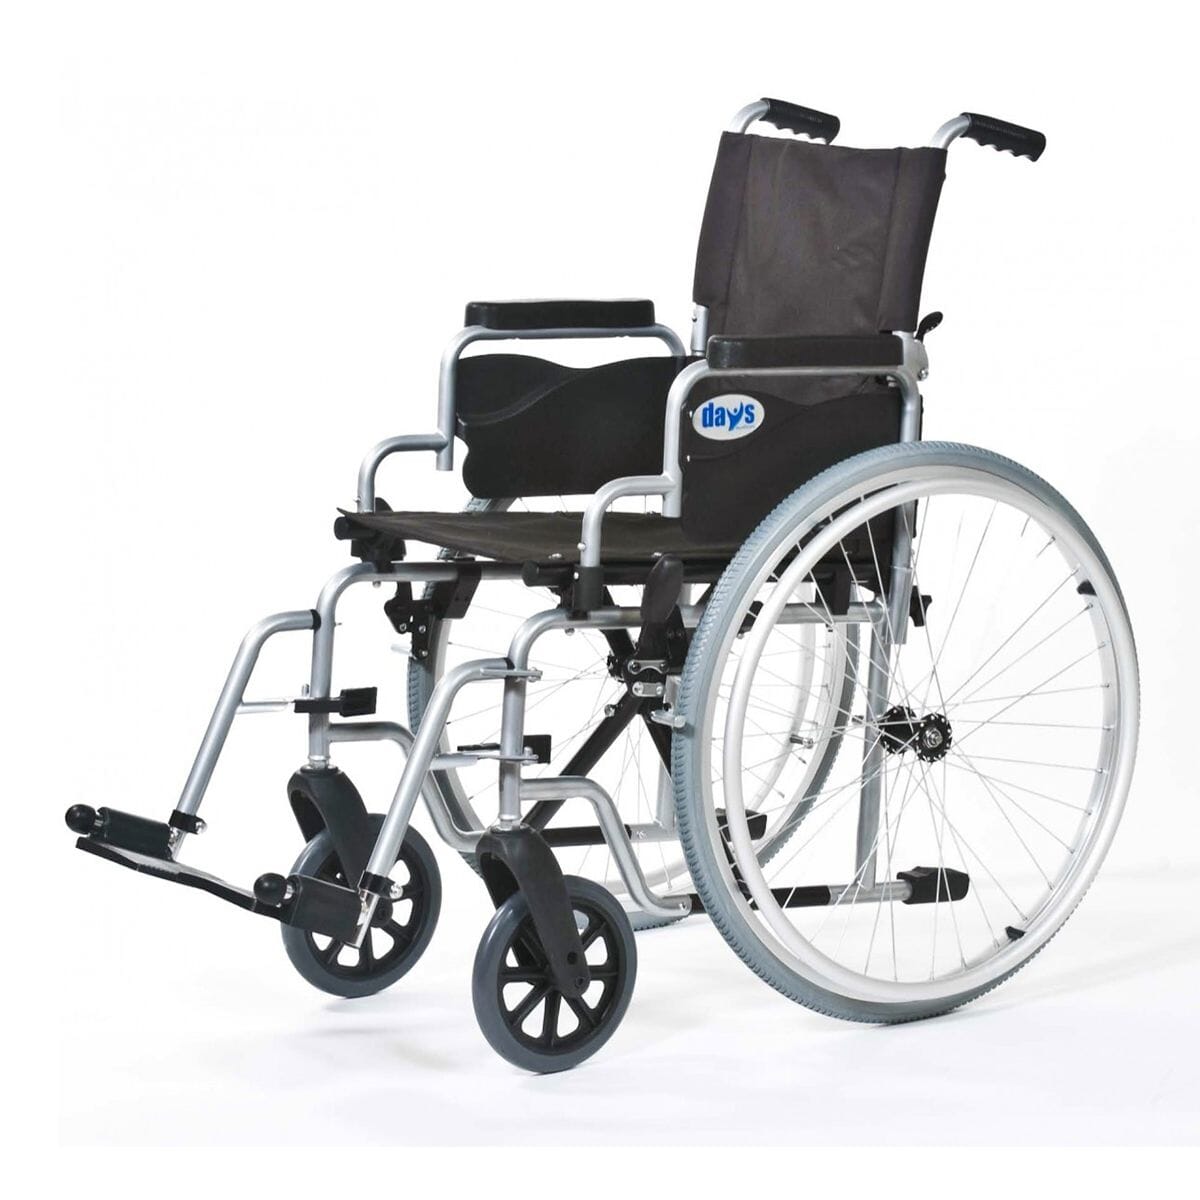 View Whirl Wheelchair Self Propelled Self Propelled Width 41cm 16inch information